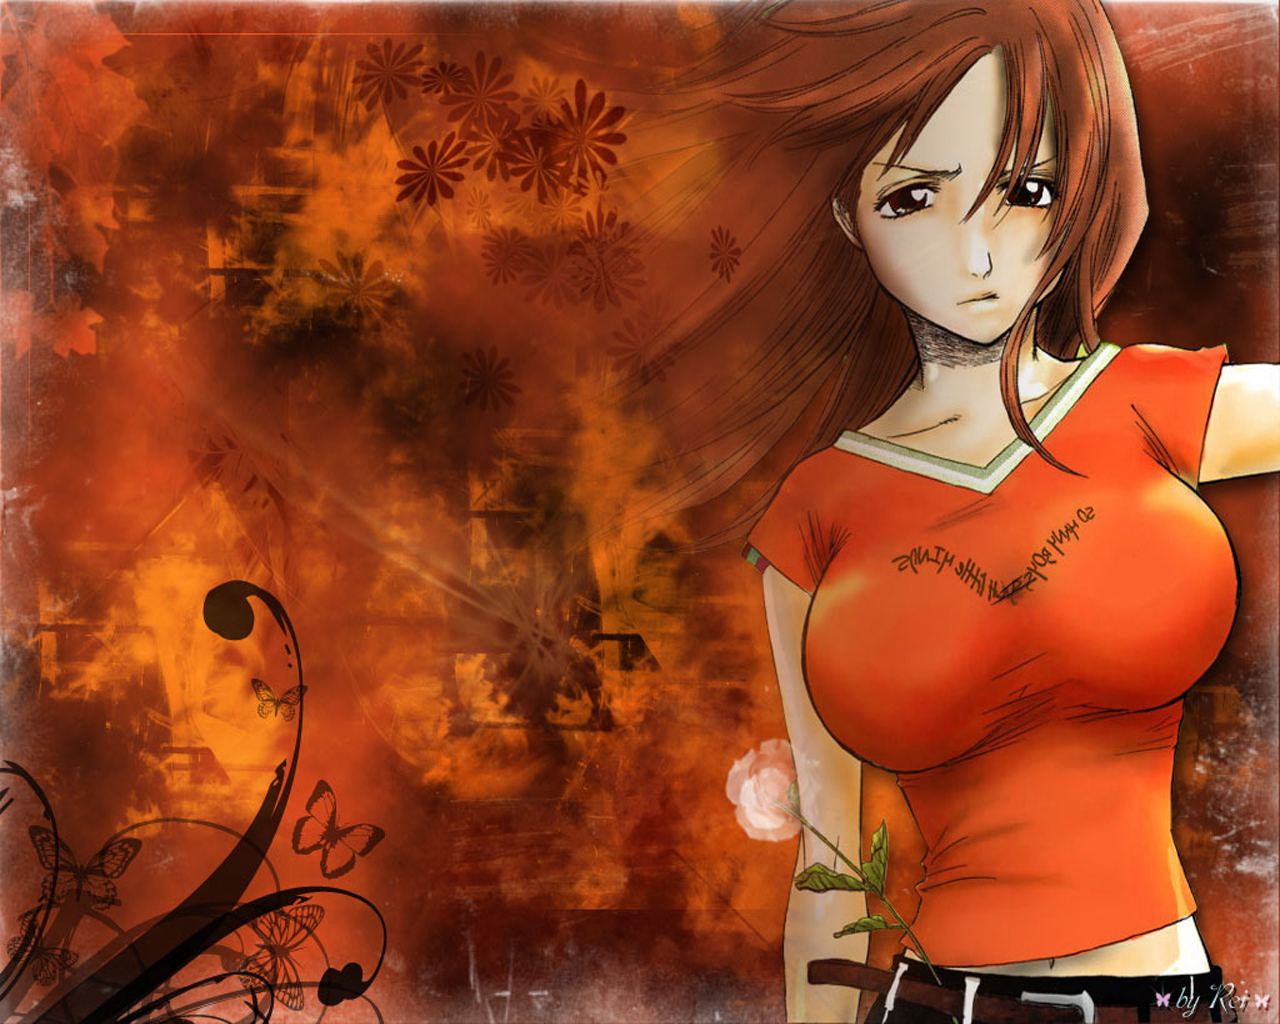 The Bleach Anime Wallpaper Titled Inoue Orihime